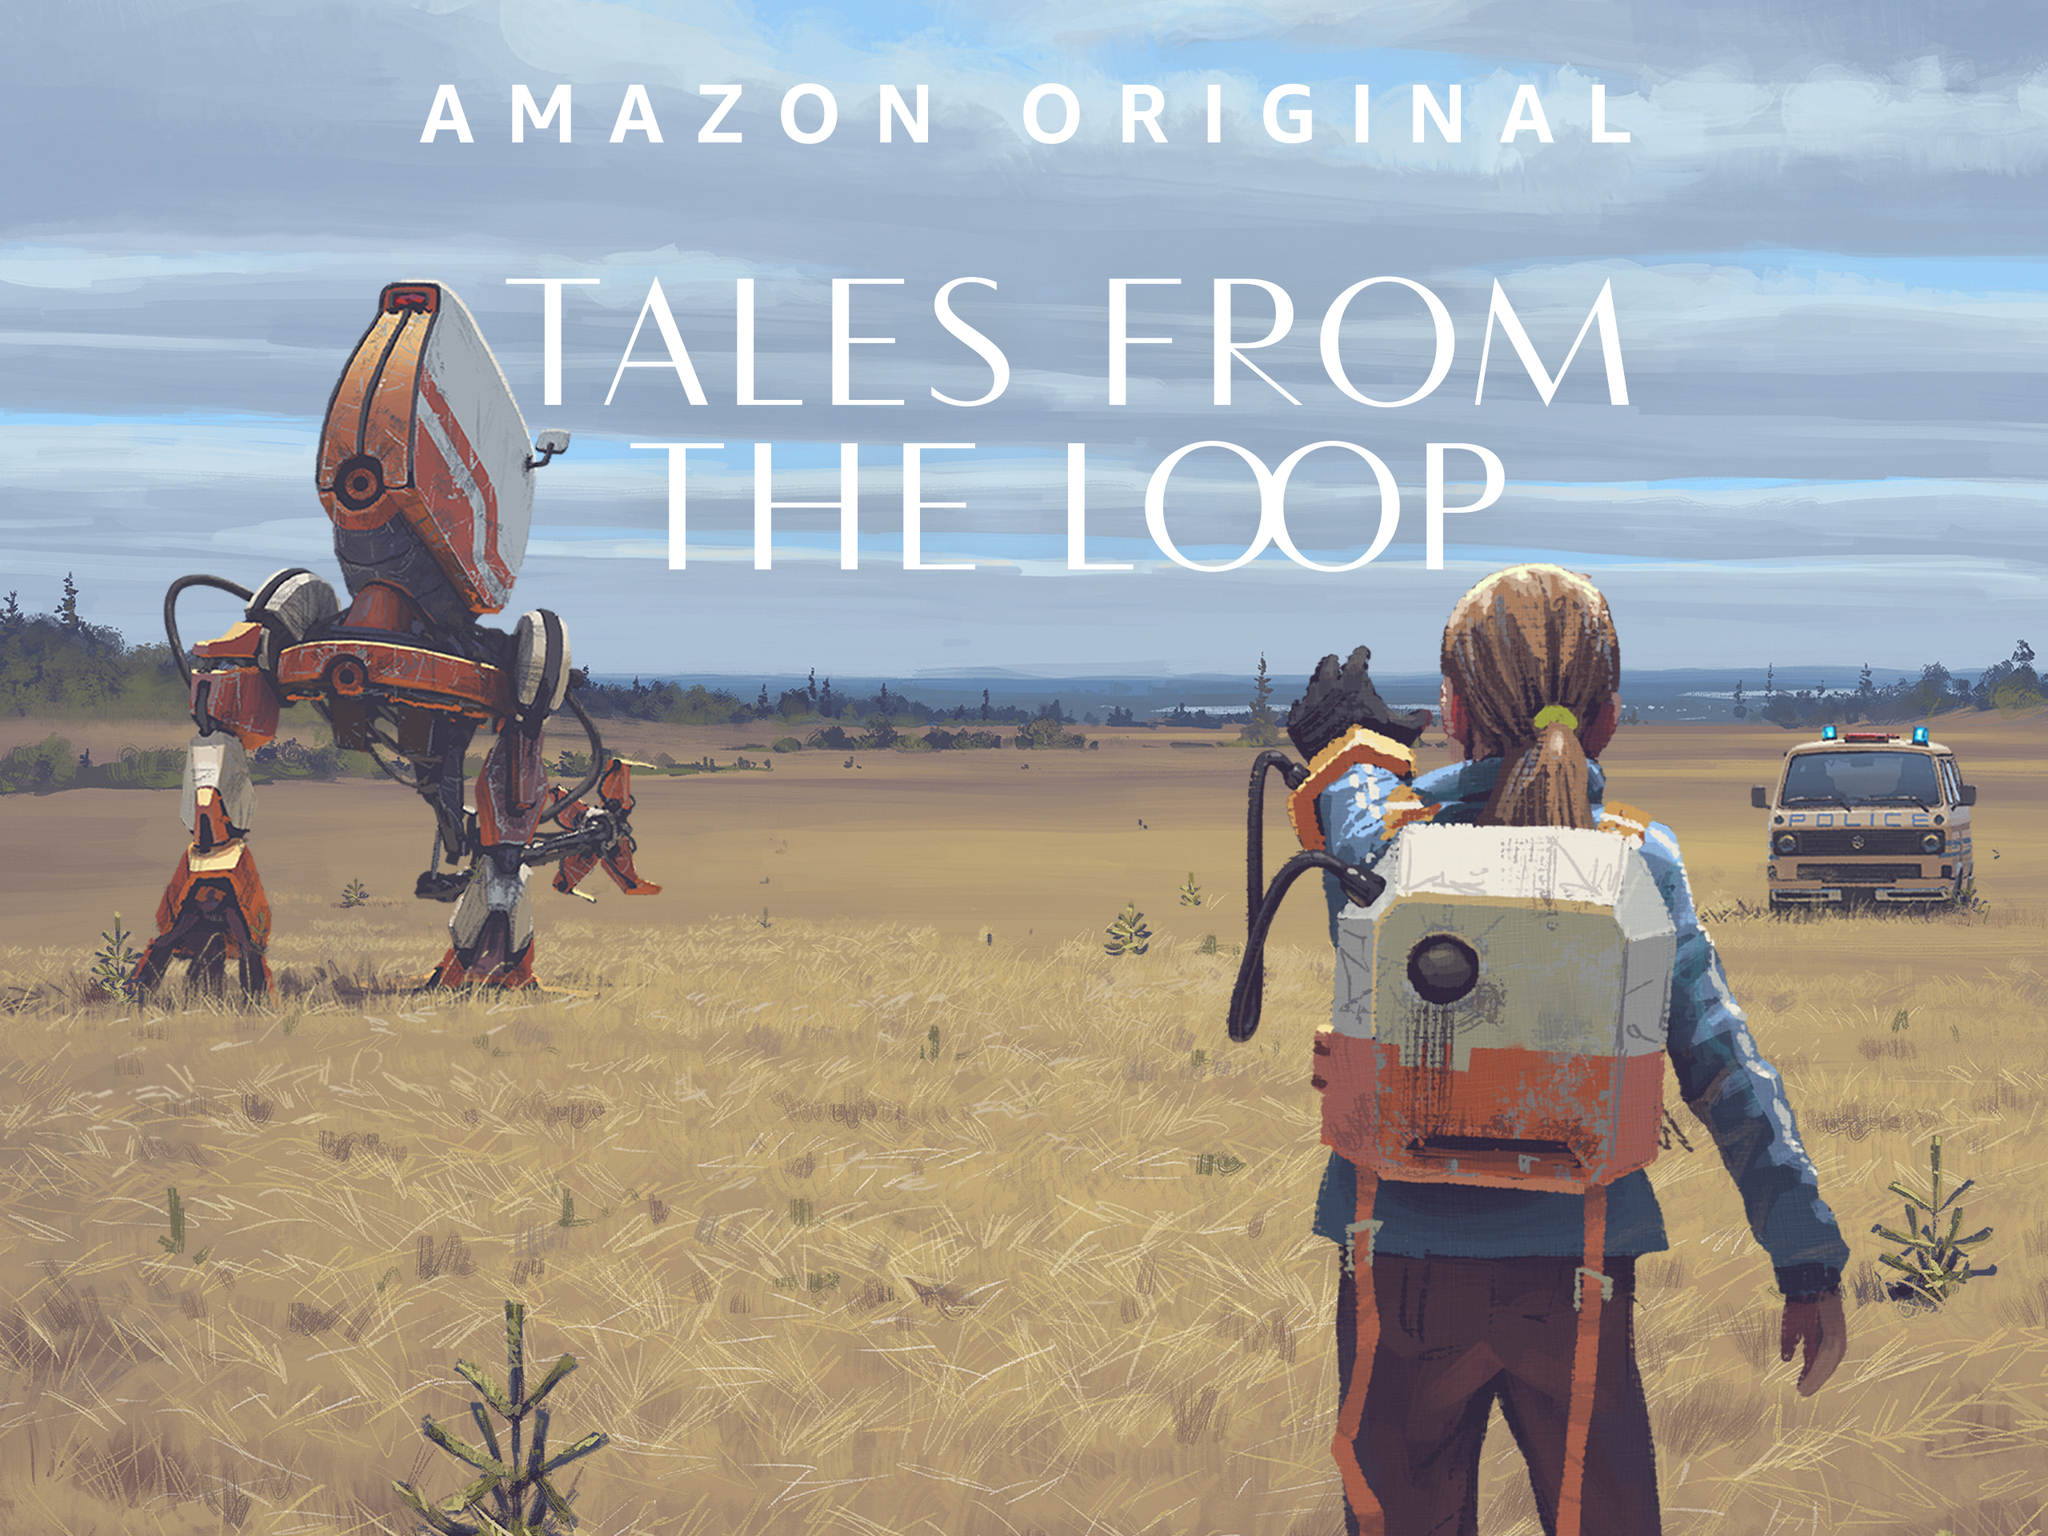 Amazon Prime has shown a trailer for series «Tales From the Loop» based on retro-futuristic graphics of Simon Stålenhag